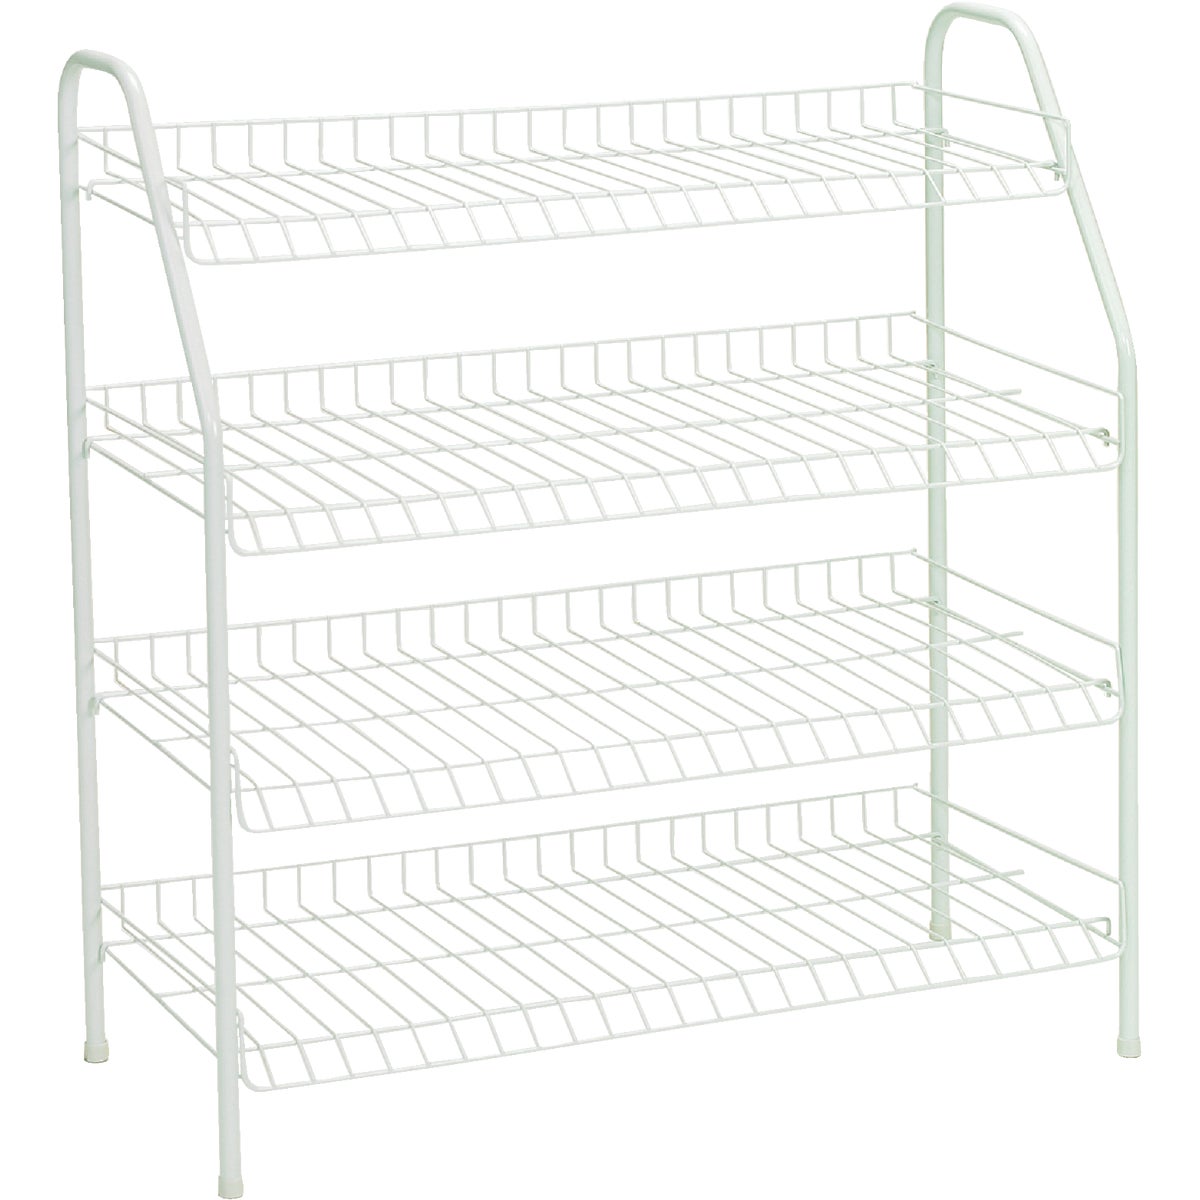 Item 200612, Sturdy unit has durable vinyl-finished wire shelving and a epoxy tubular 